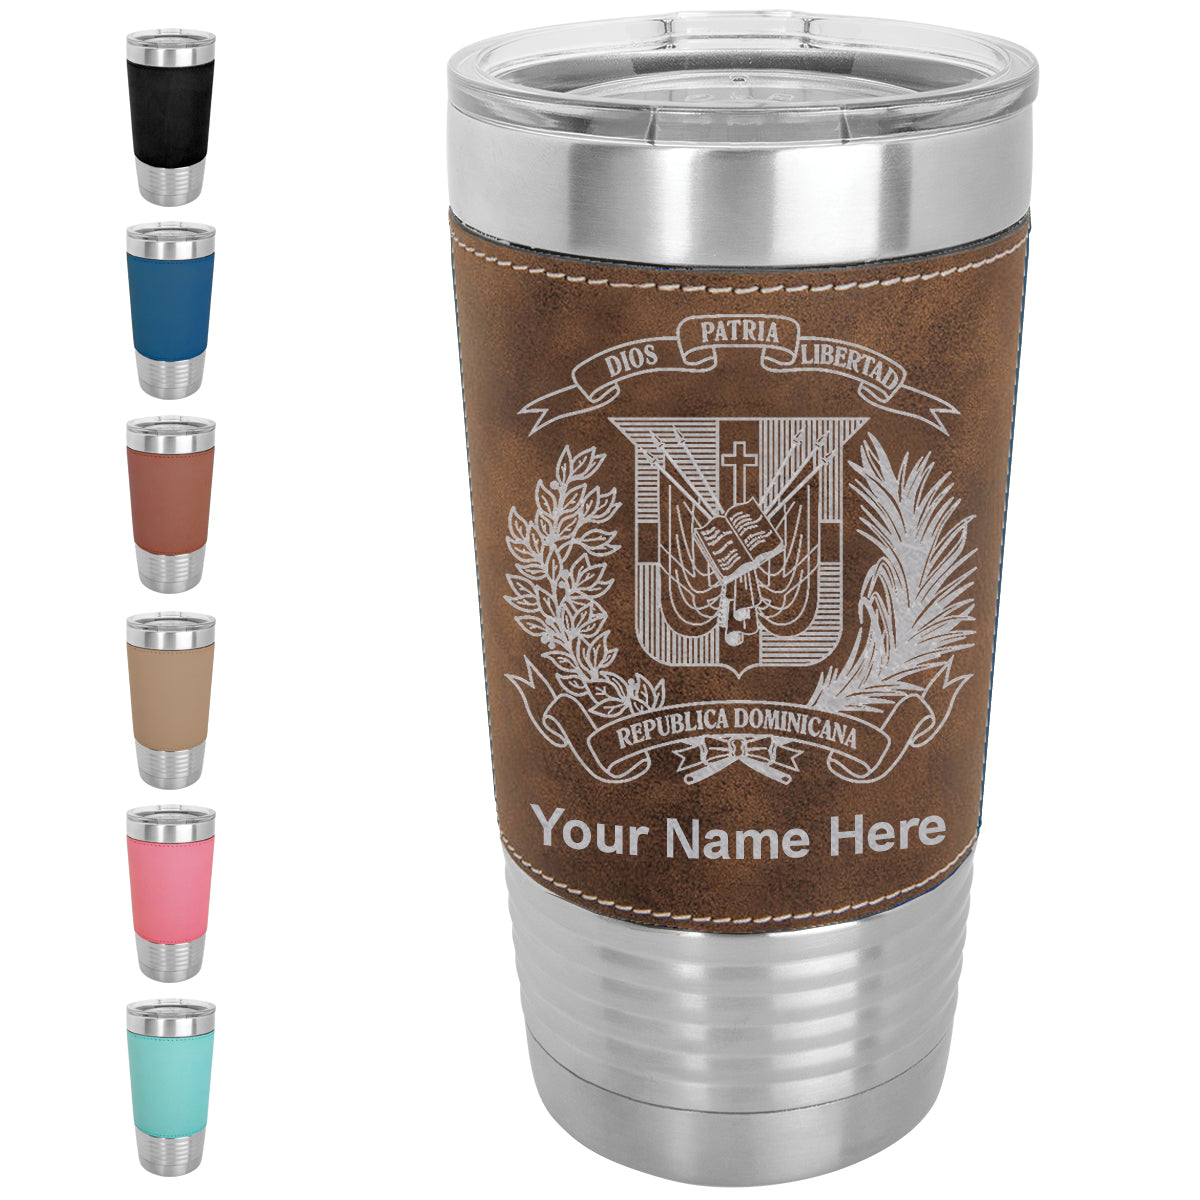 20oz Faux Leather Tumbler Mug, Coat of Arms Dominican Republic, Personalized Engraving Included - LaserGram Custom Engraved Gifts